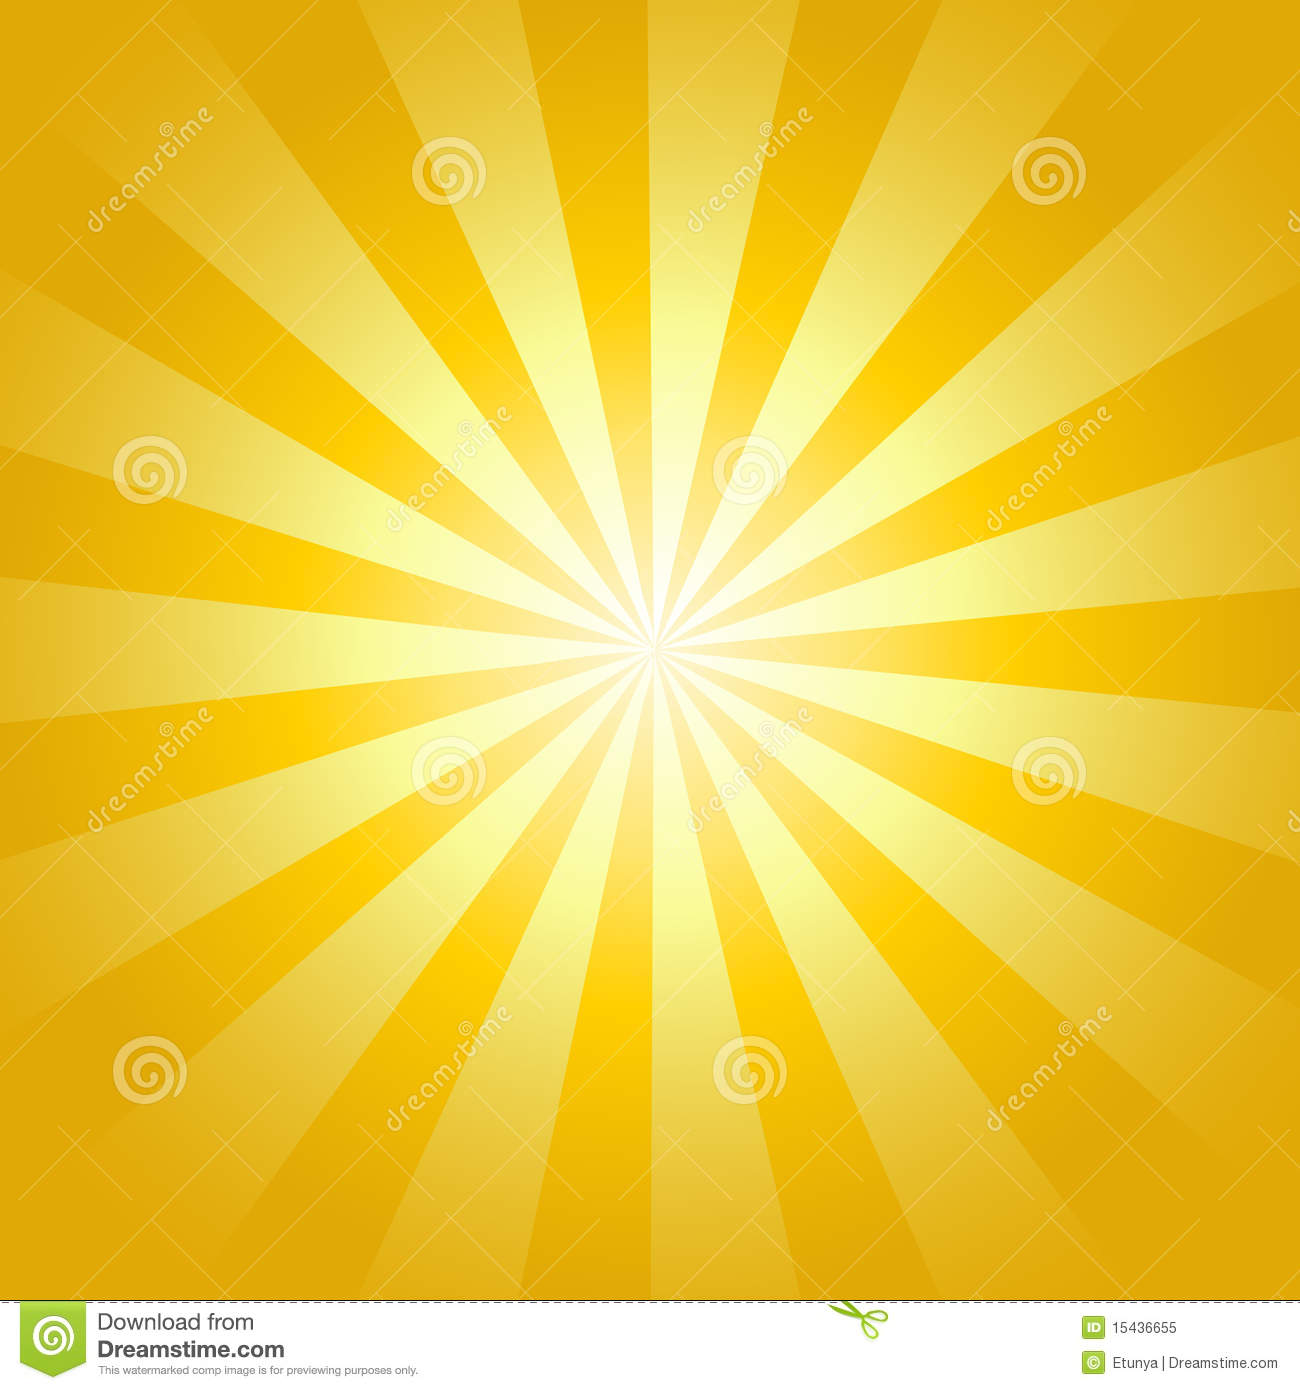 Related Pictures Background With Clipart Sun Rise Download This